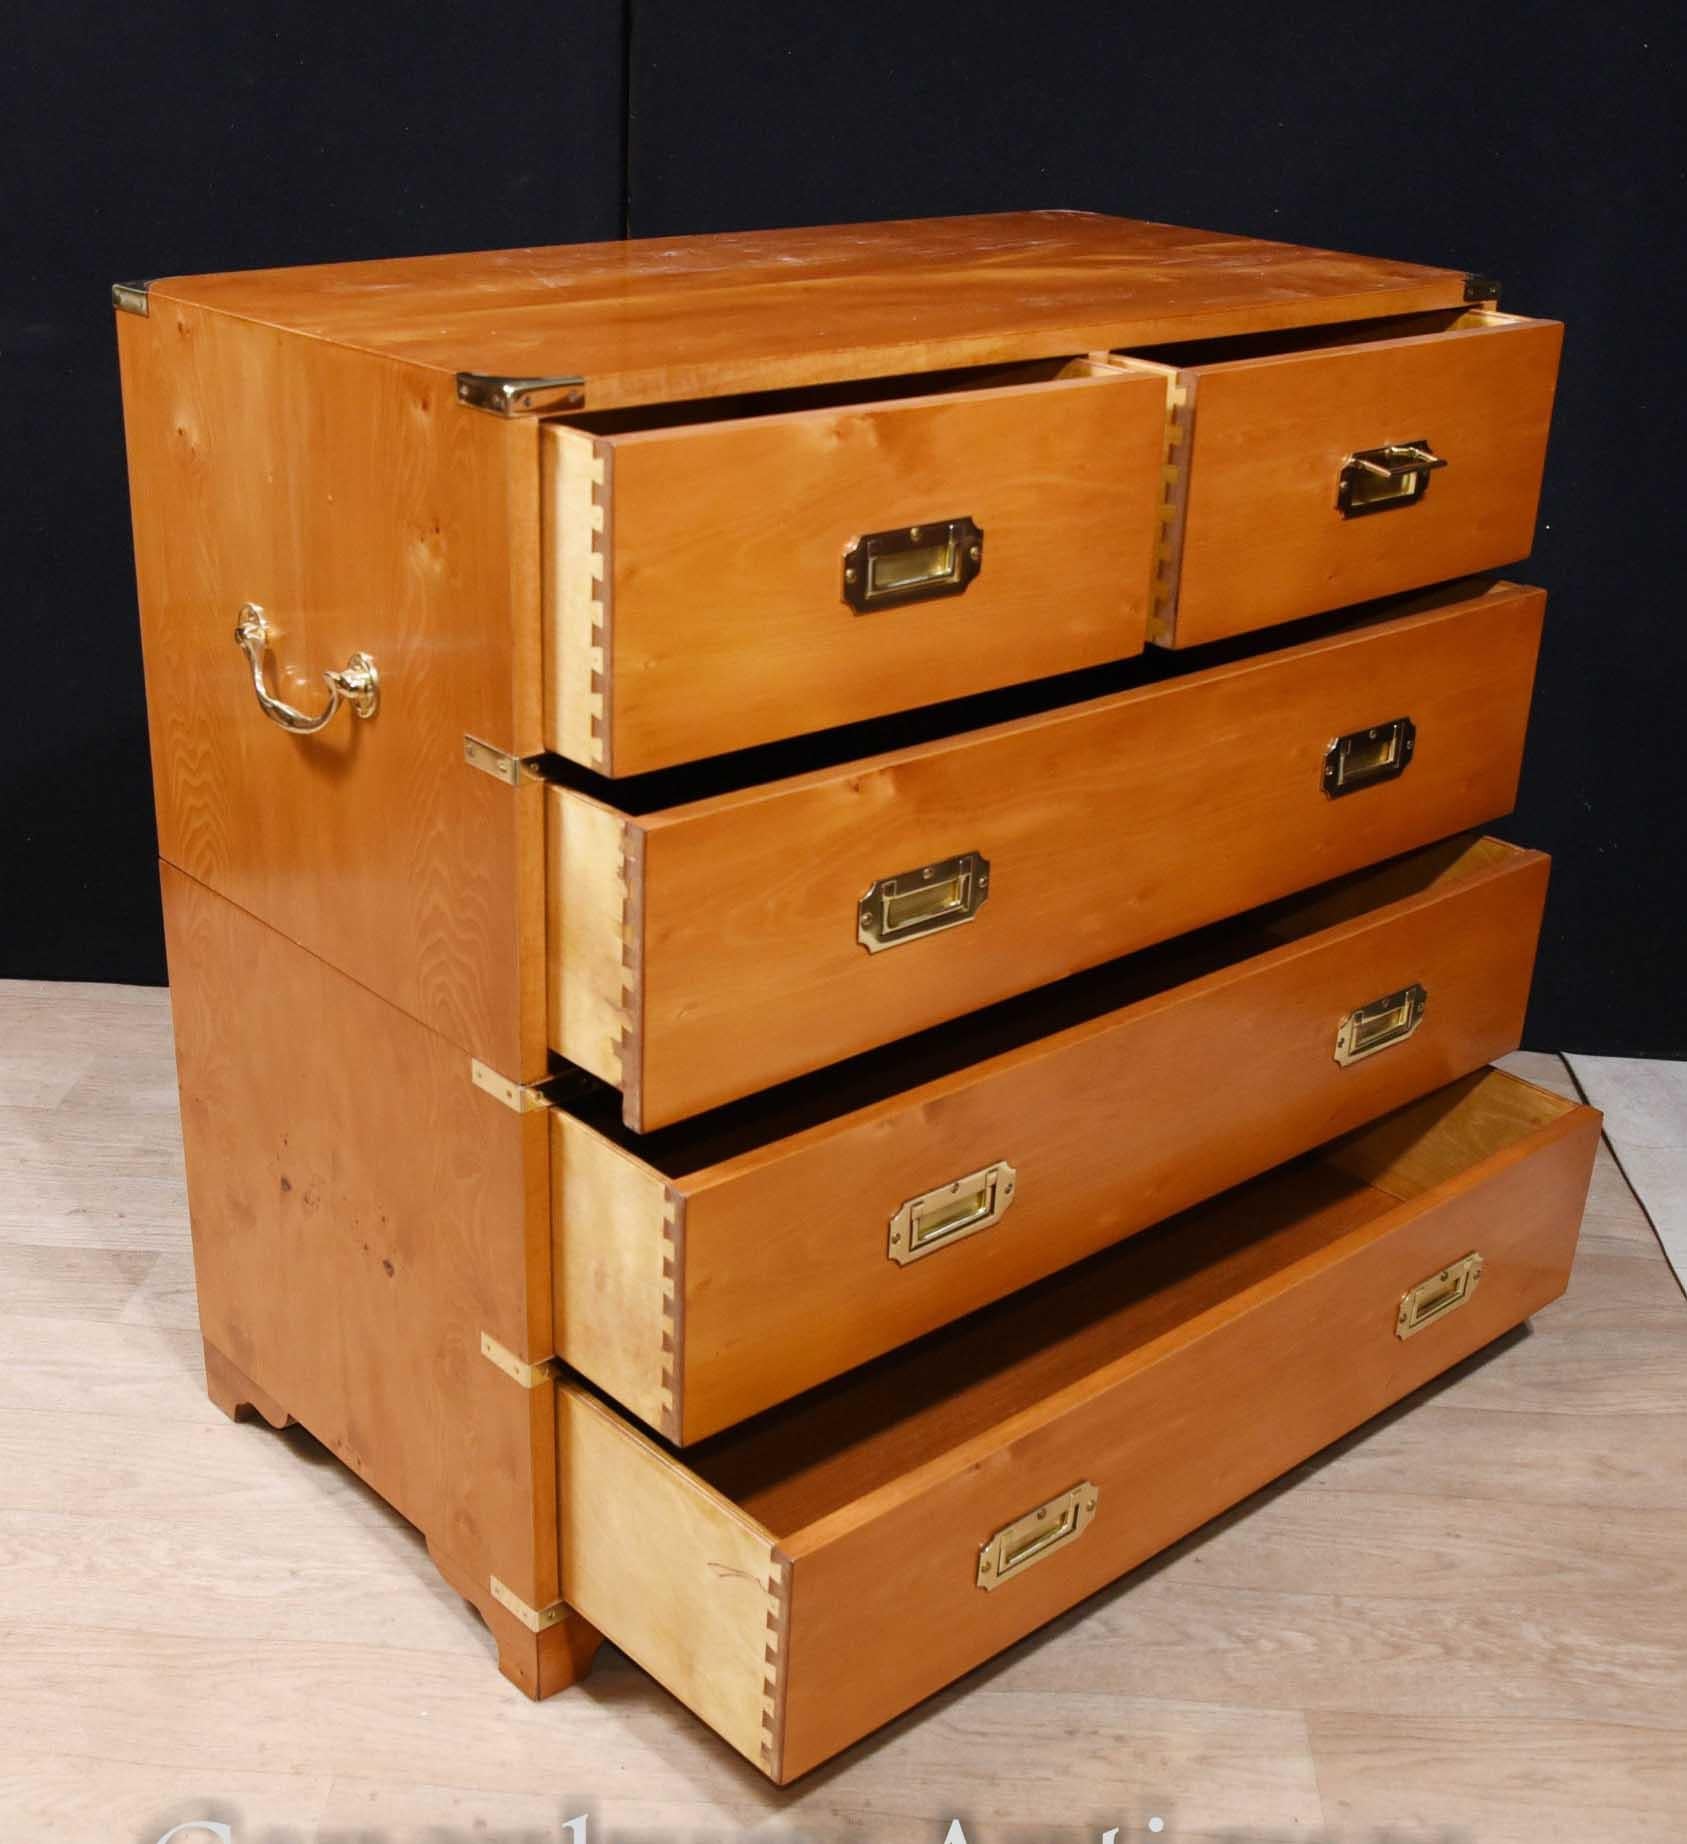 - Cracking campaign chest of drawers in walnut.
- Classic campaign look with the brass handles and corner protectors.
- Campaign furniture was designed to be moved around easily.
- Five drawers so ample storage on this gorgeous chest of